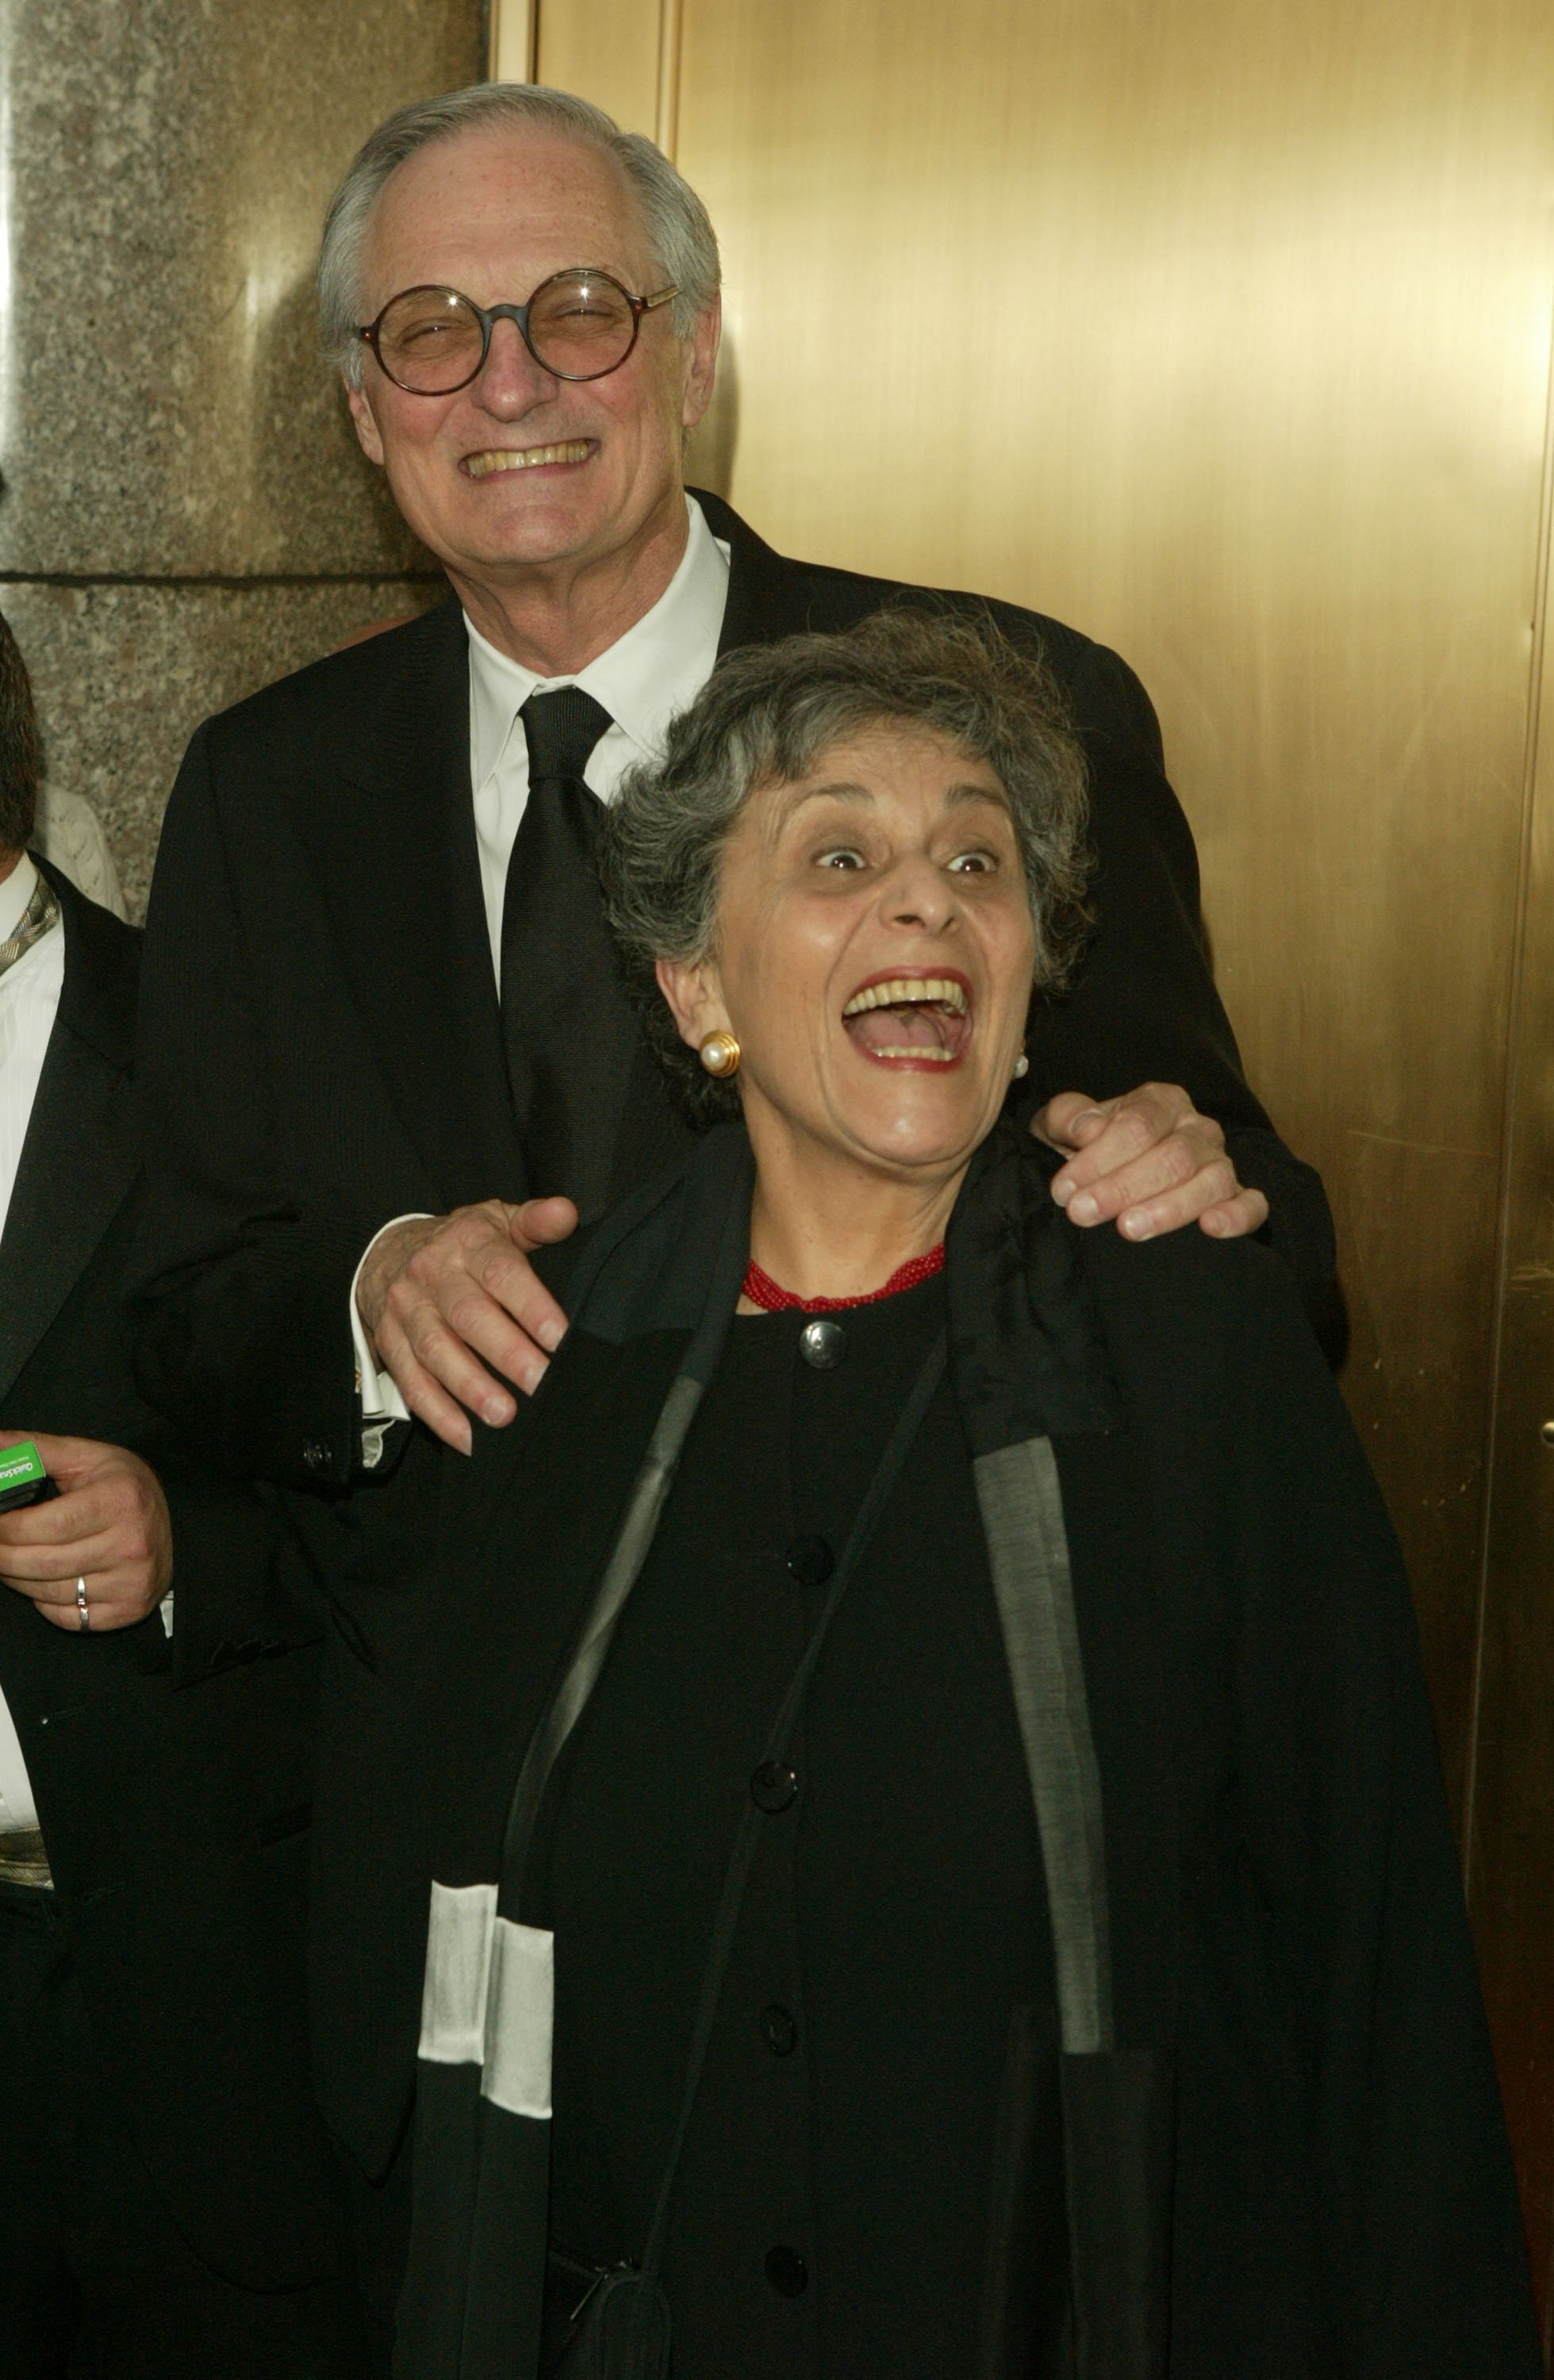 Alan Alda and wife Arlene Alda attend the 59th Annual Tony Awards in New York City on June 5, 2005 | Photo: Getty Images